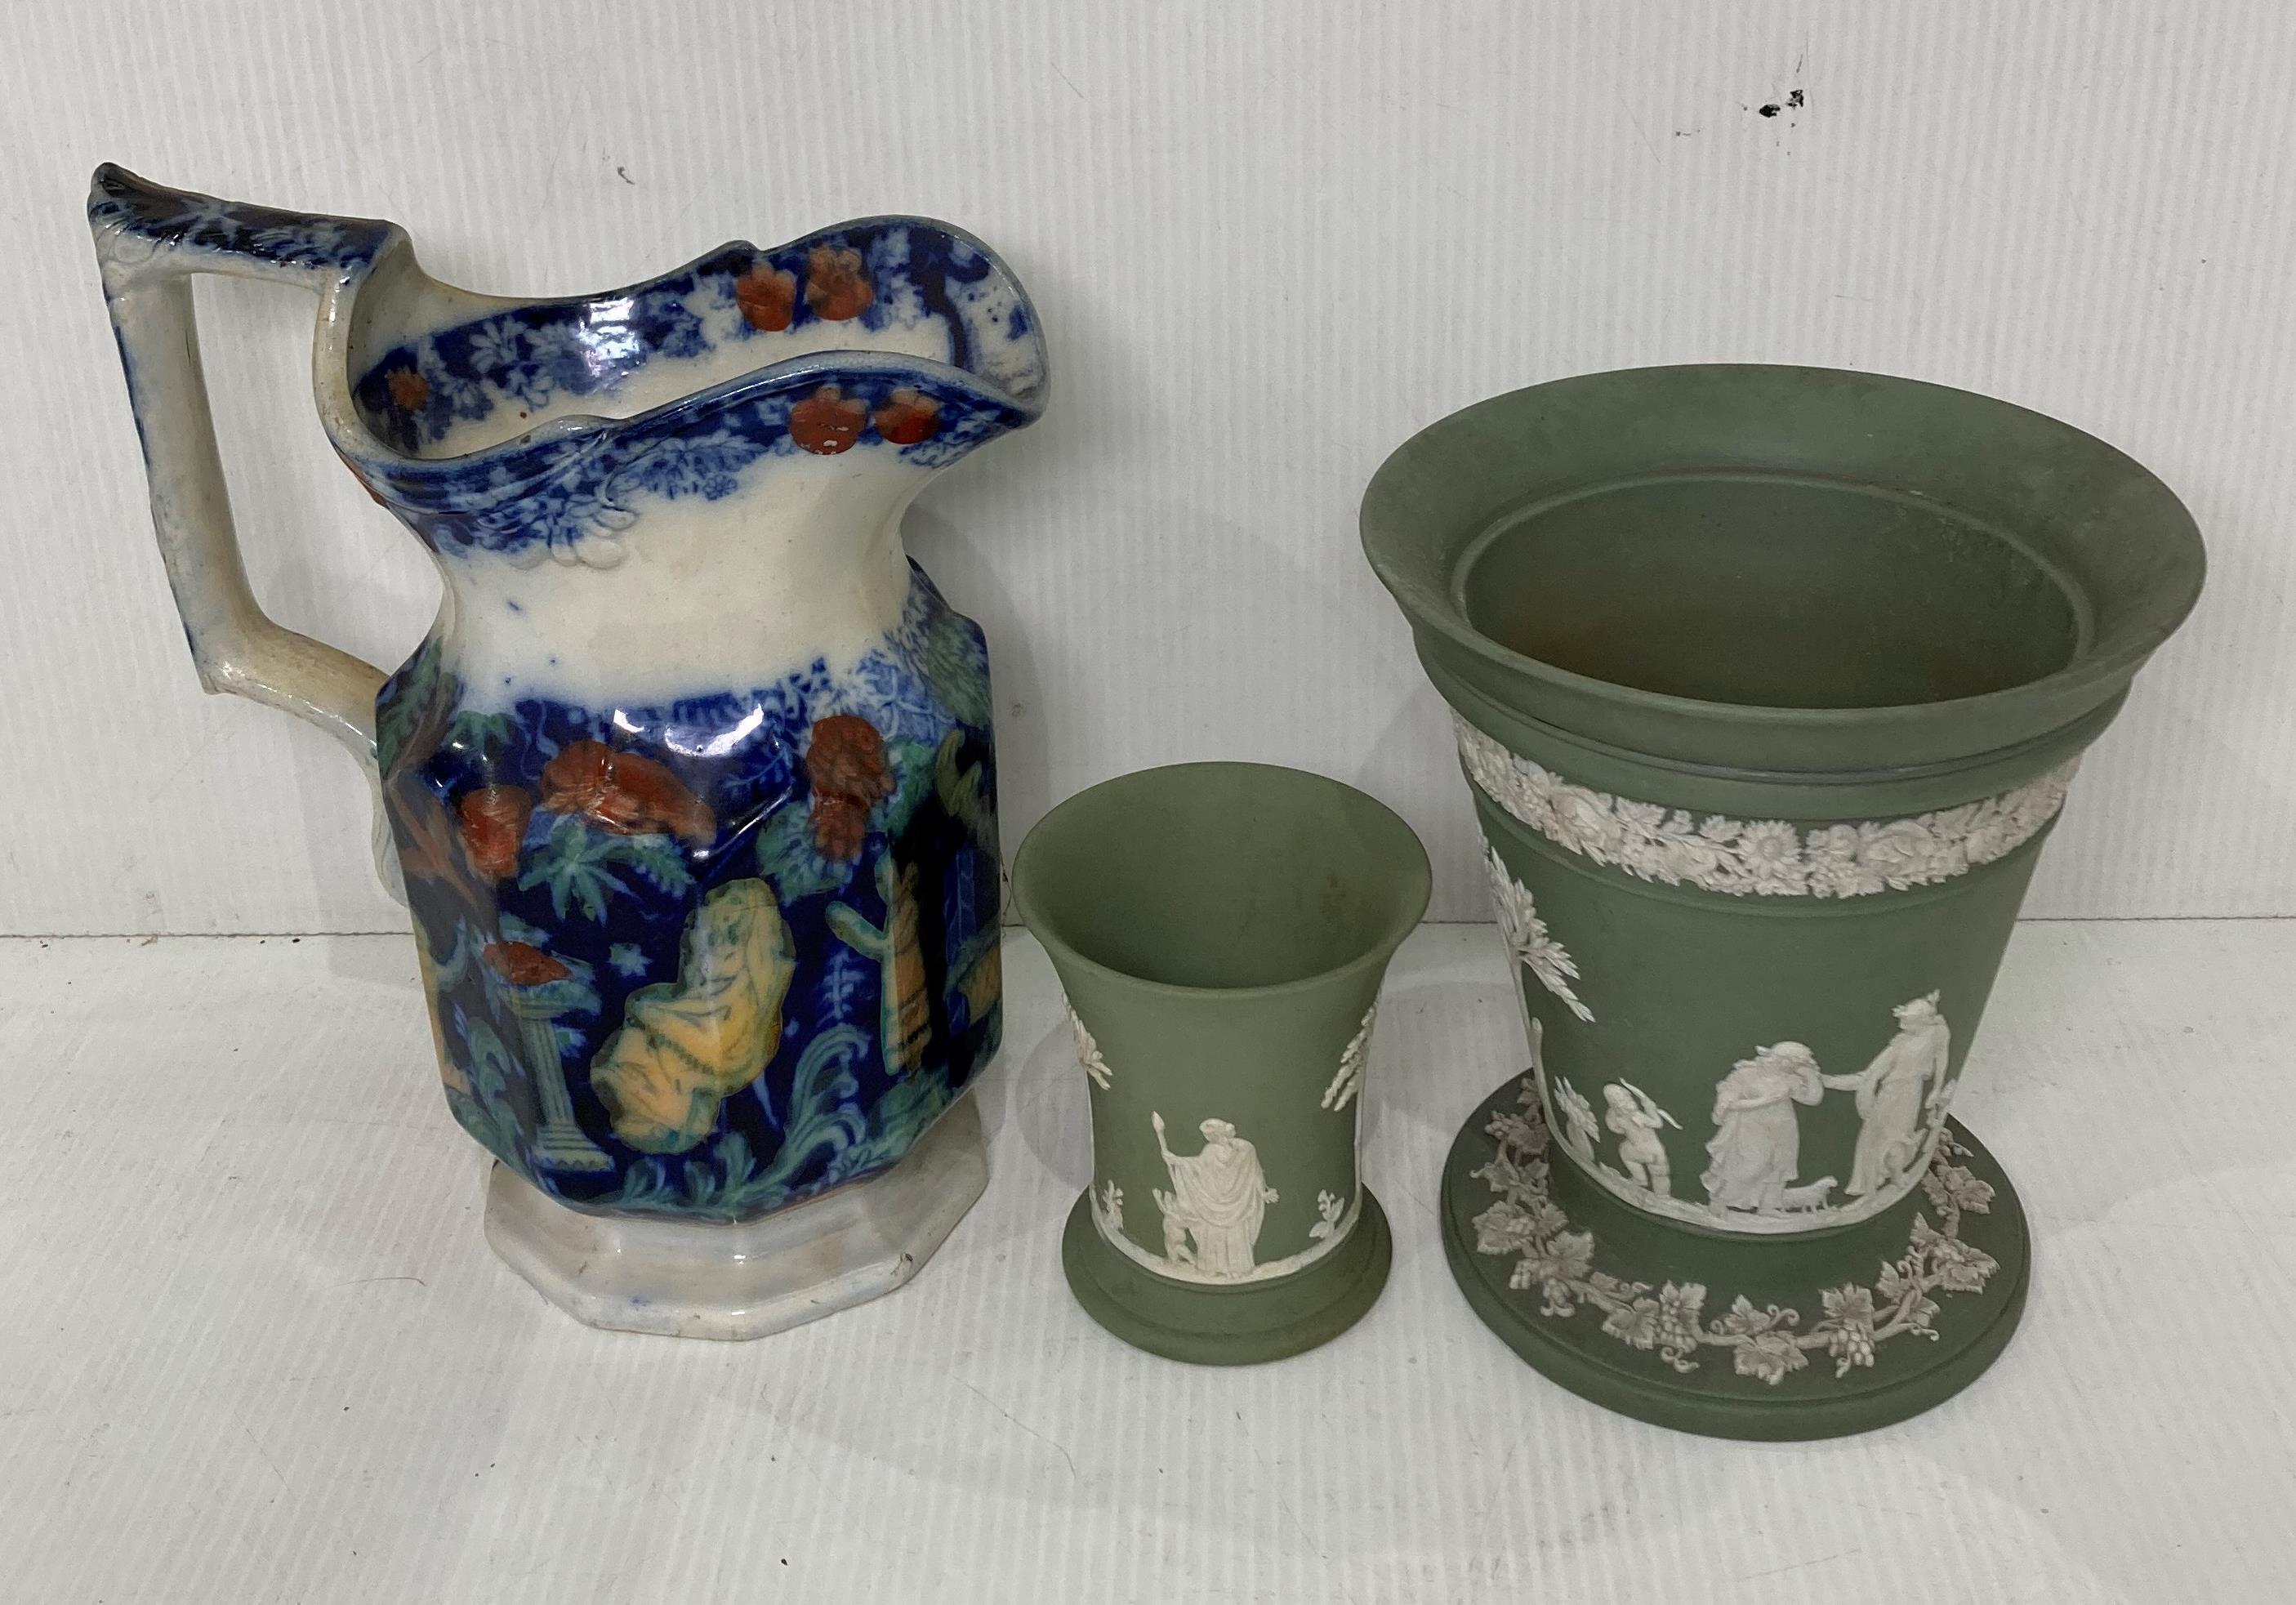 A vintage Italian style water jug and two green and white Wedgwood items (saleroom location: S3